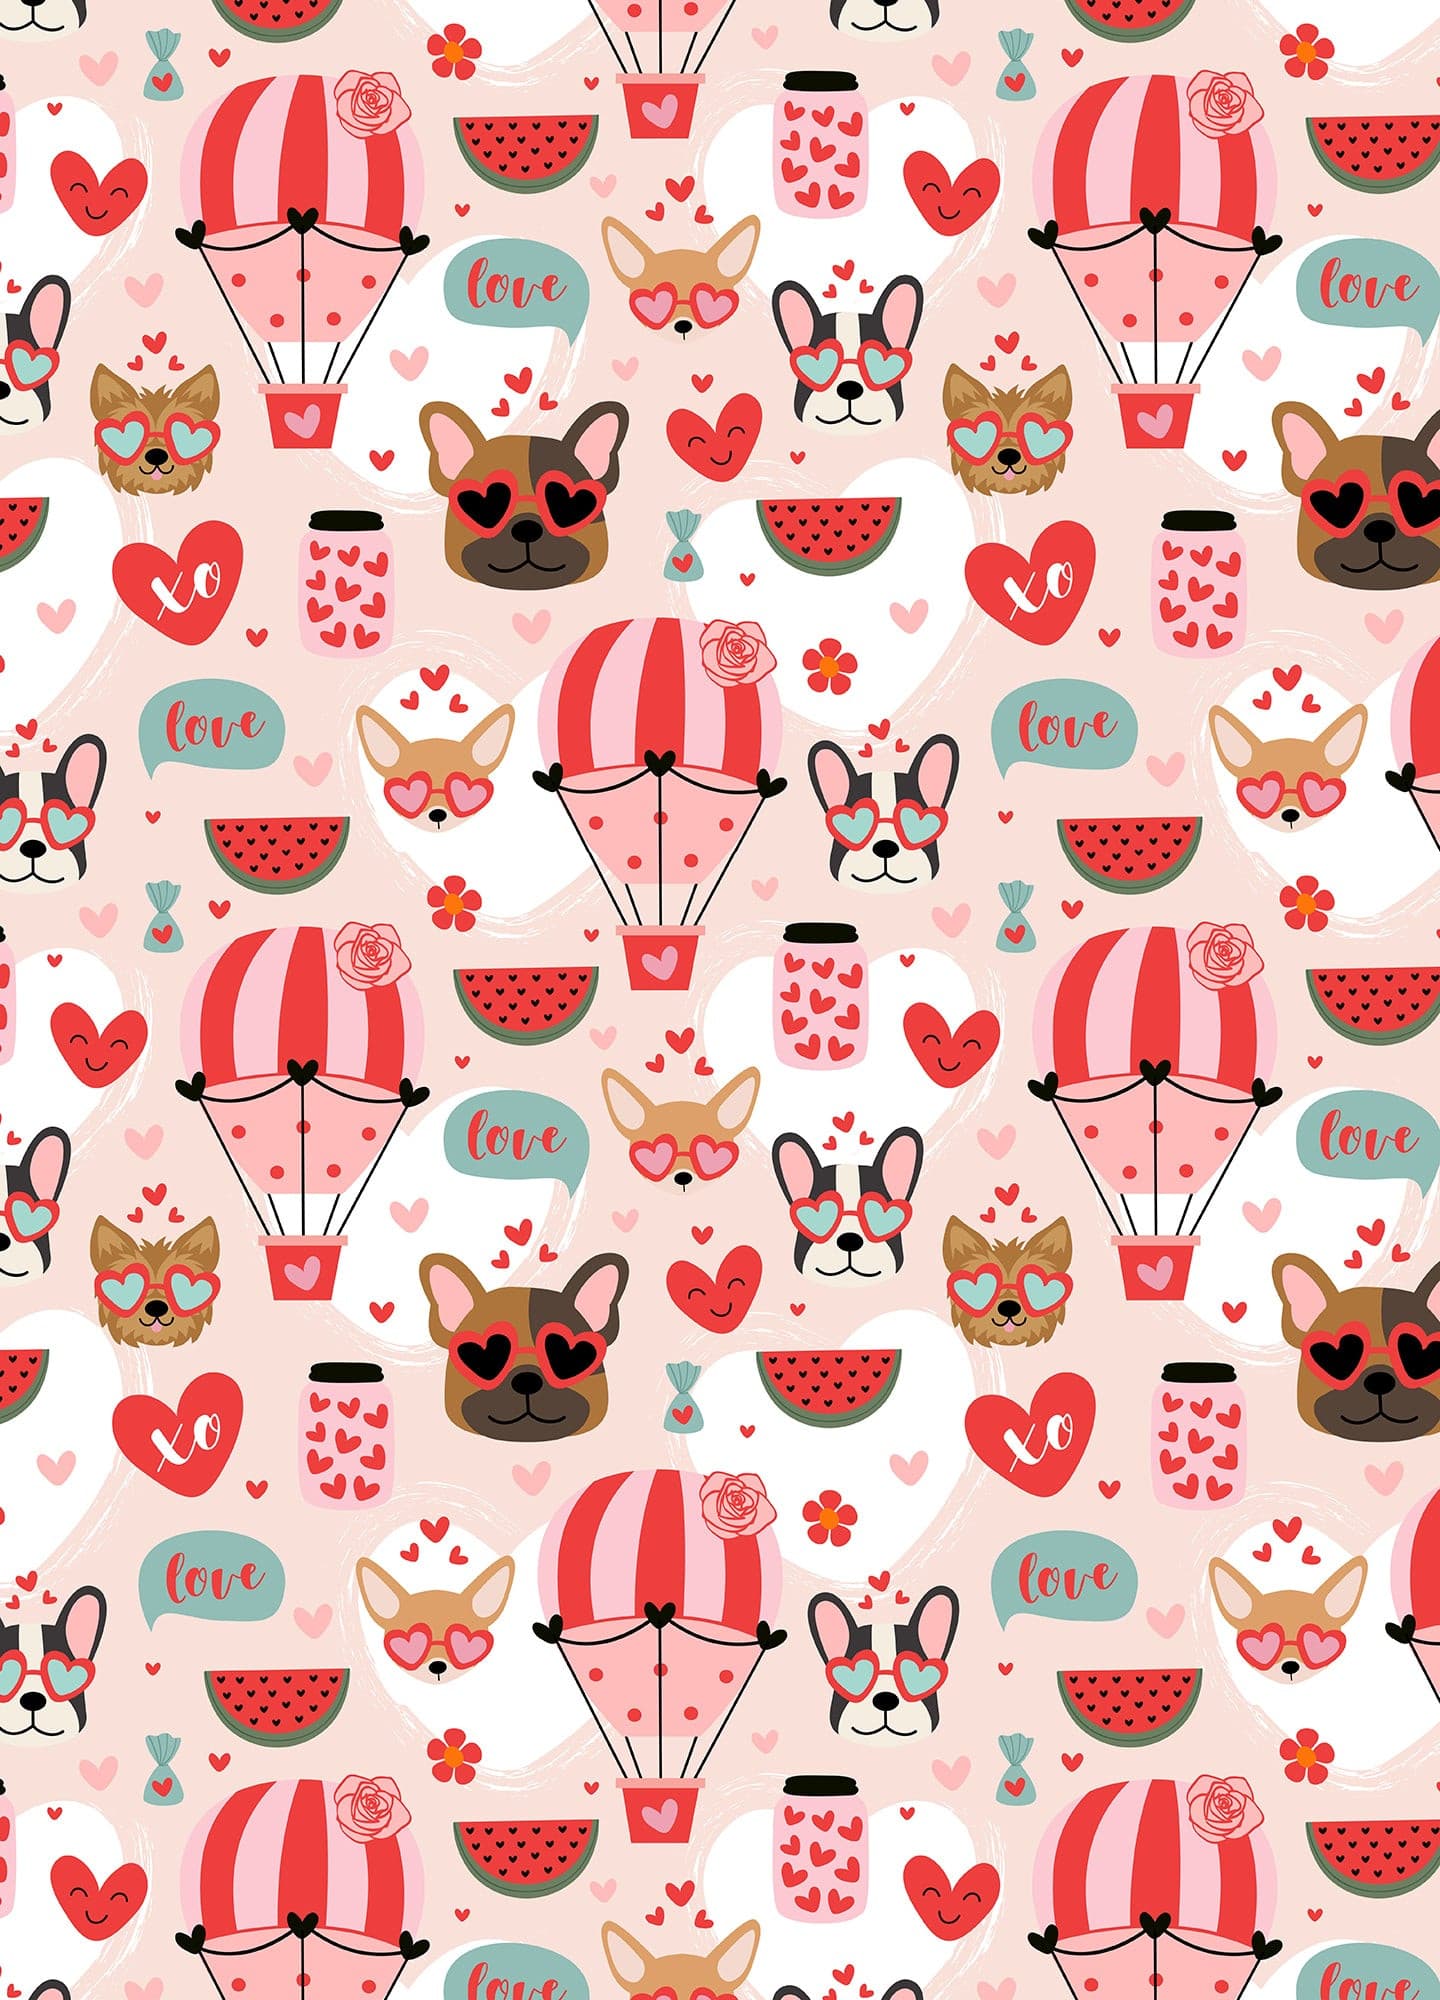 Cats and Dogs Wrapping Paper.